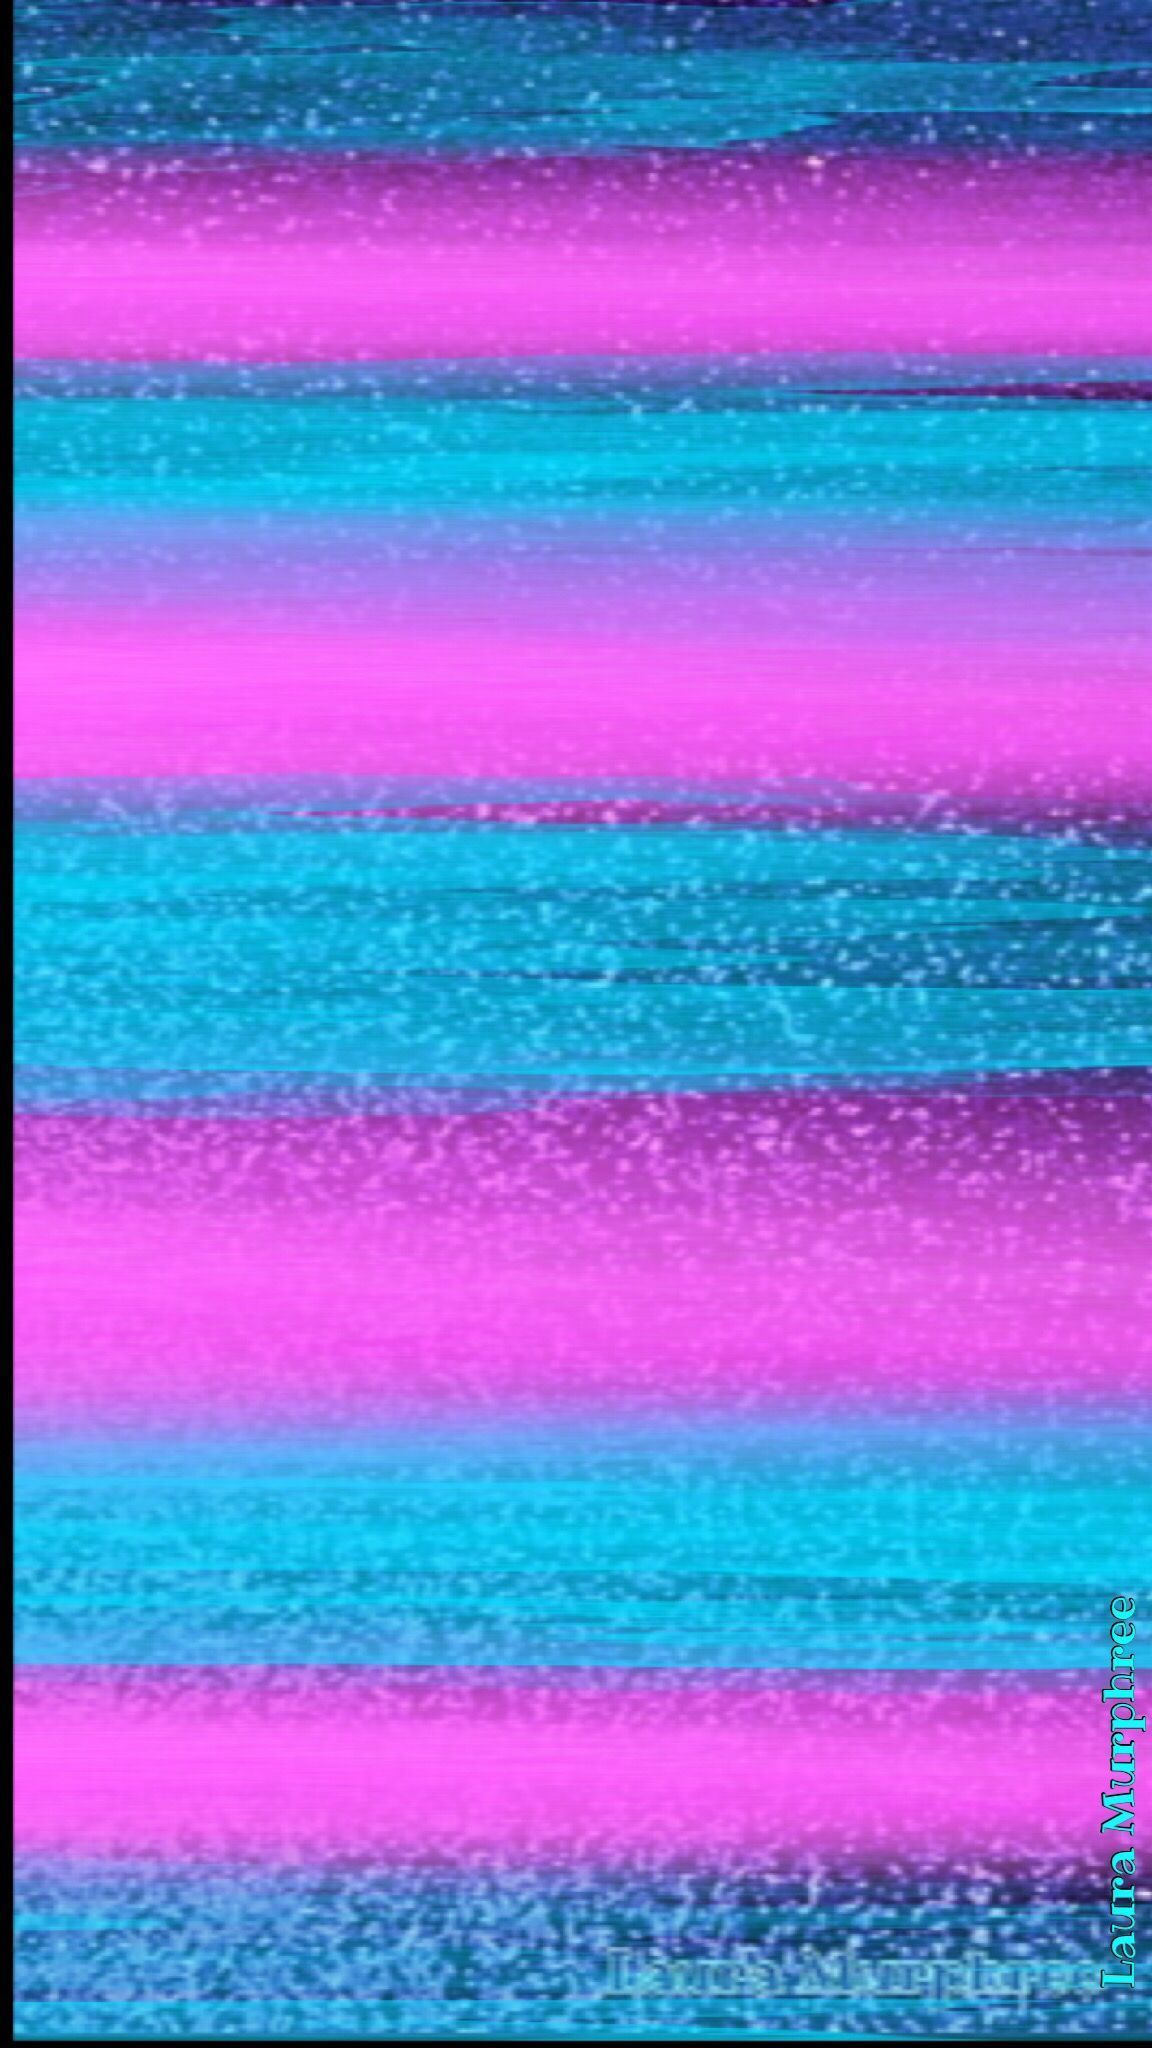 hot pink and blue wallpaper